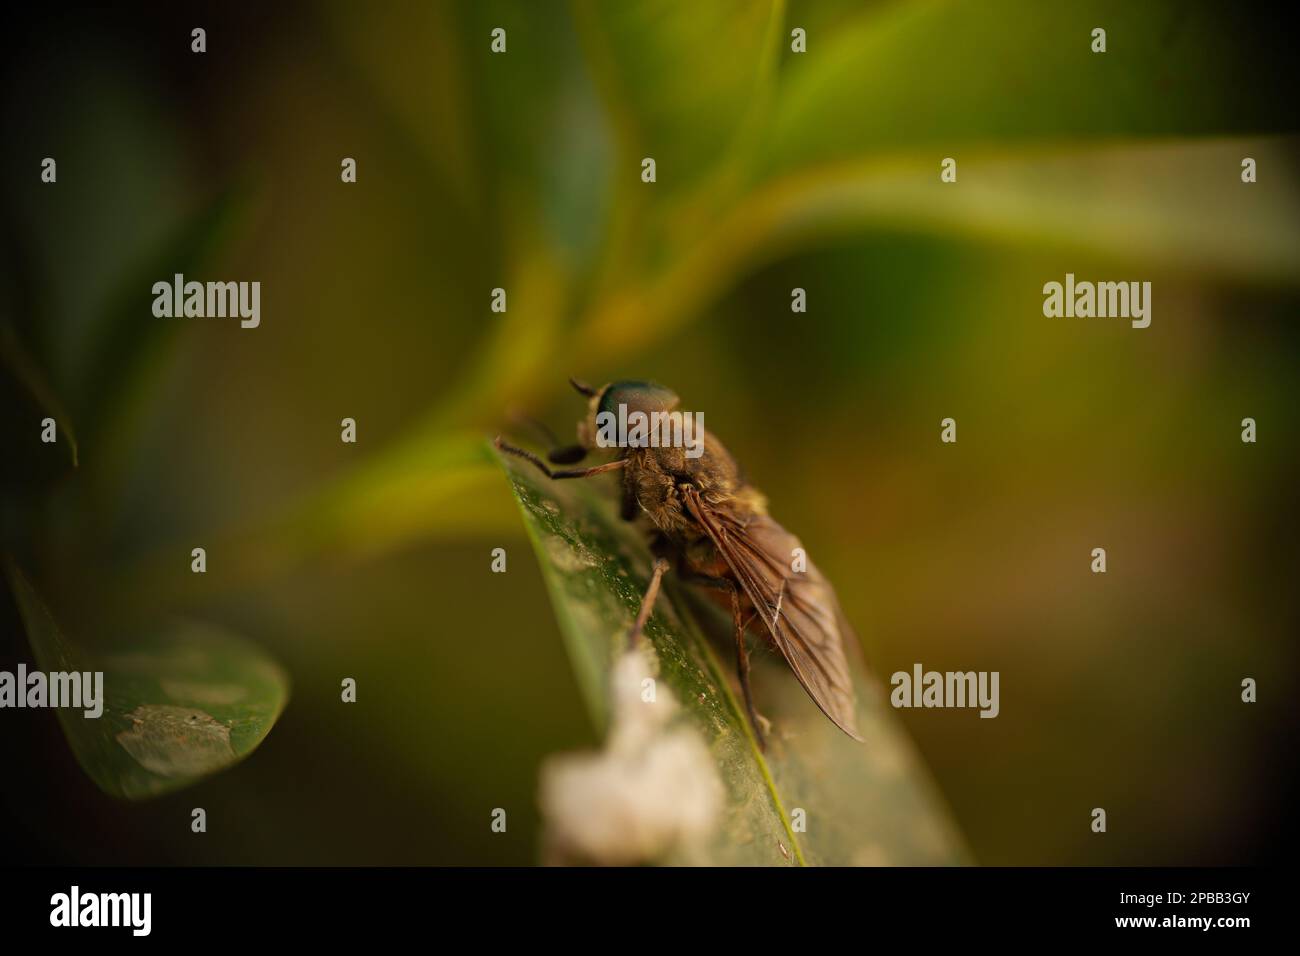 Horsefly in profile between green leaves Stock Photo